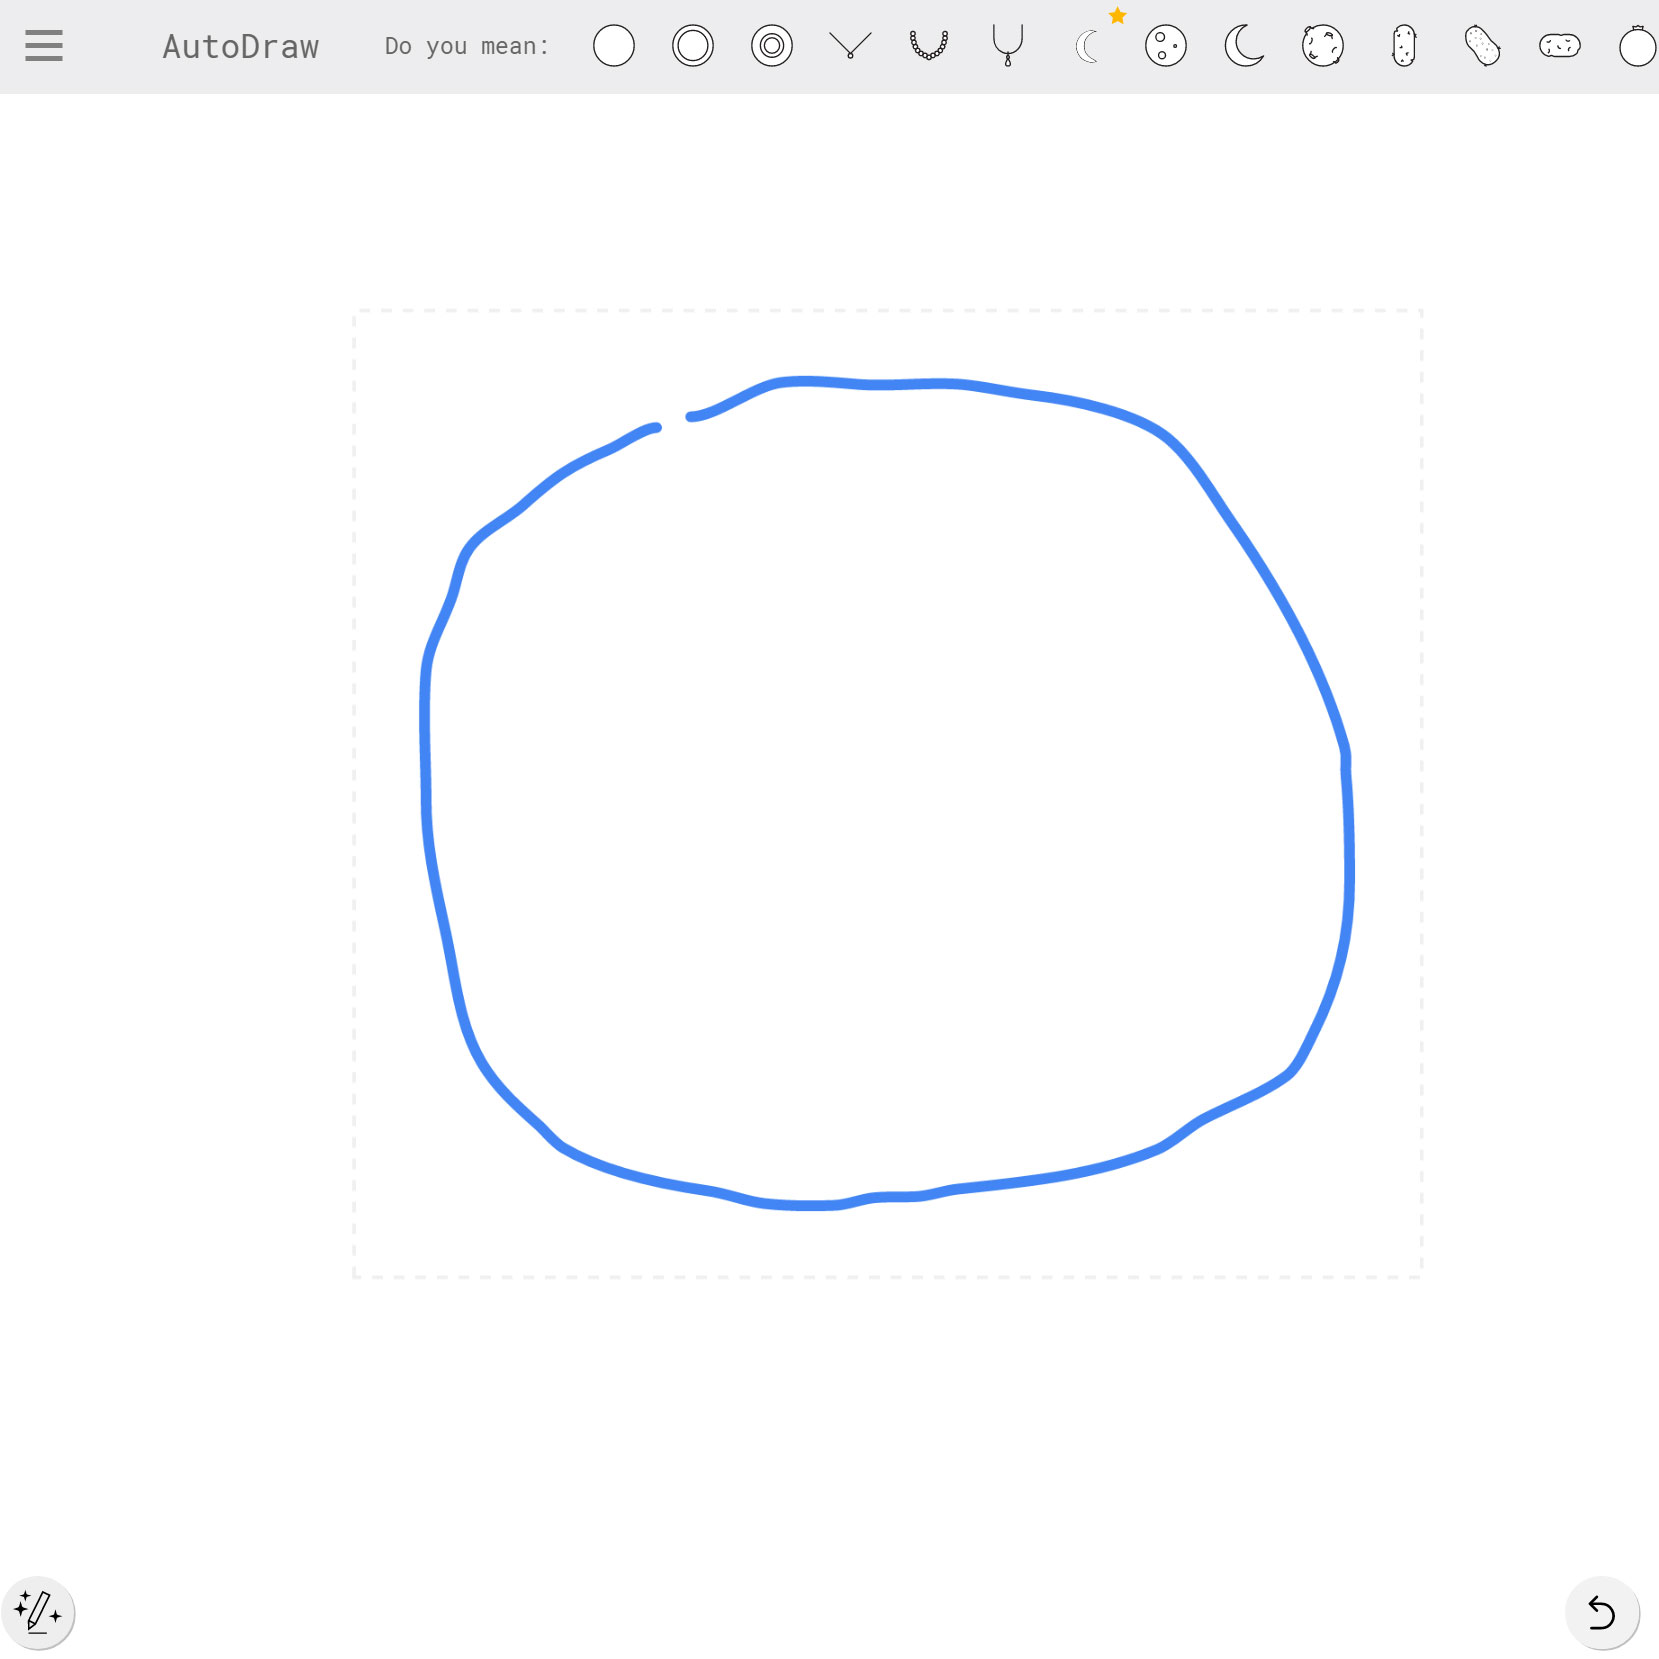 AutoDraw by Google Creative Lab - Experiments with Google